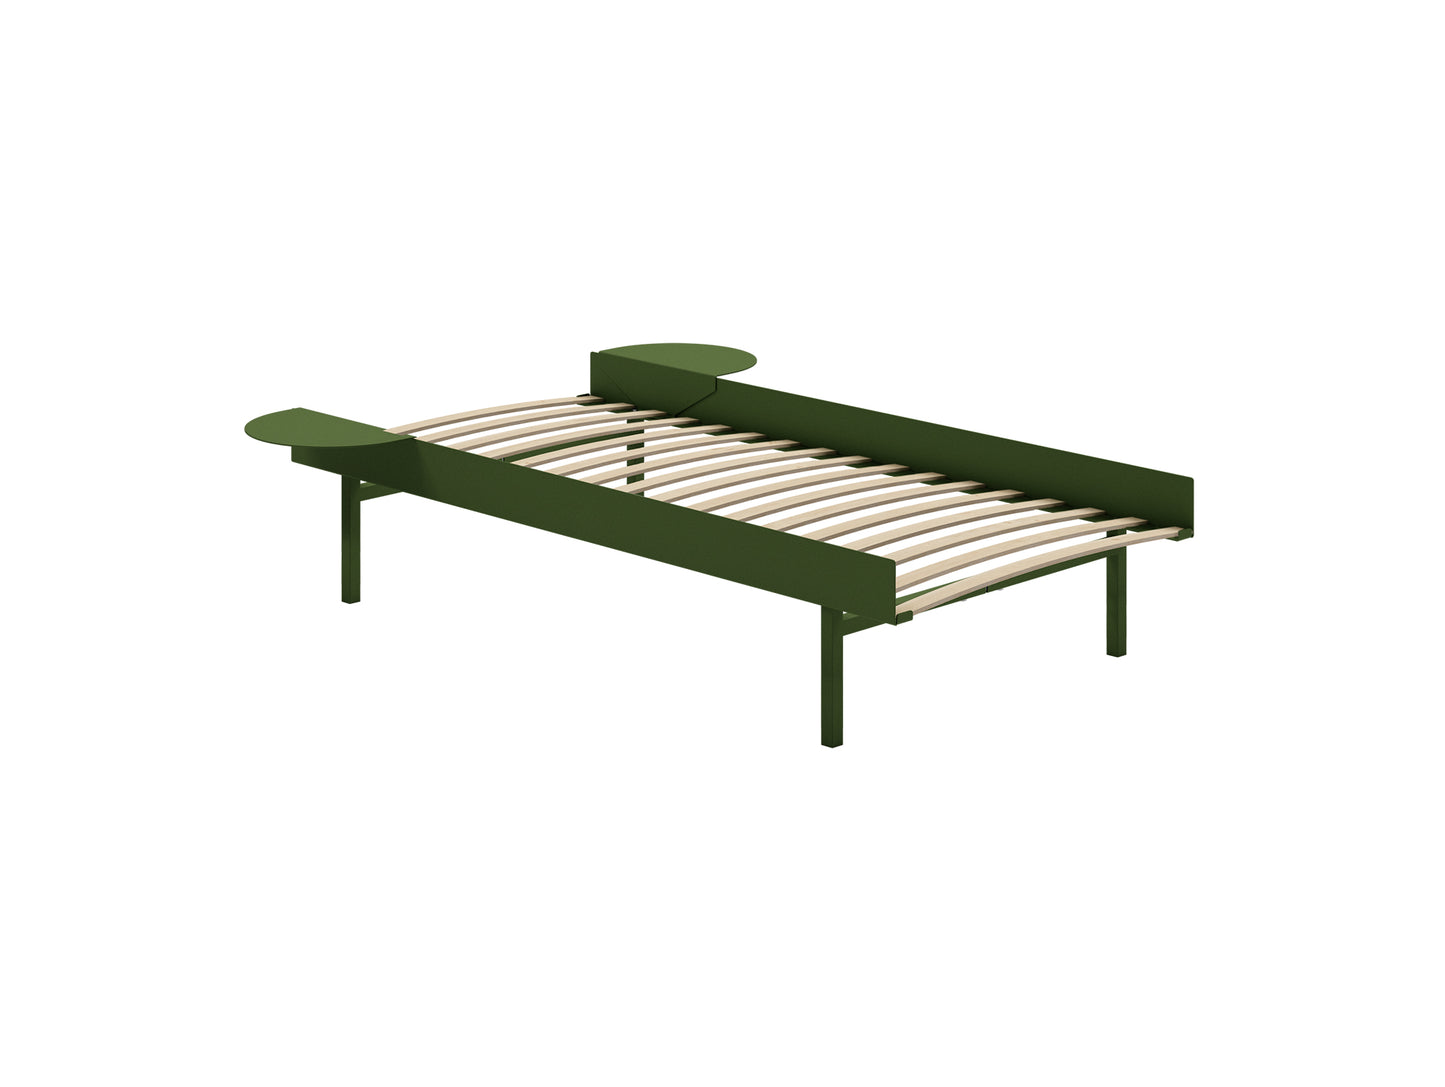 Bed 90 - 180 cm (High) by Moebe- Bed Frame / with 90cm wide Slats /  2 Side Table /  Pine Green